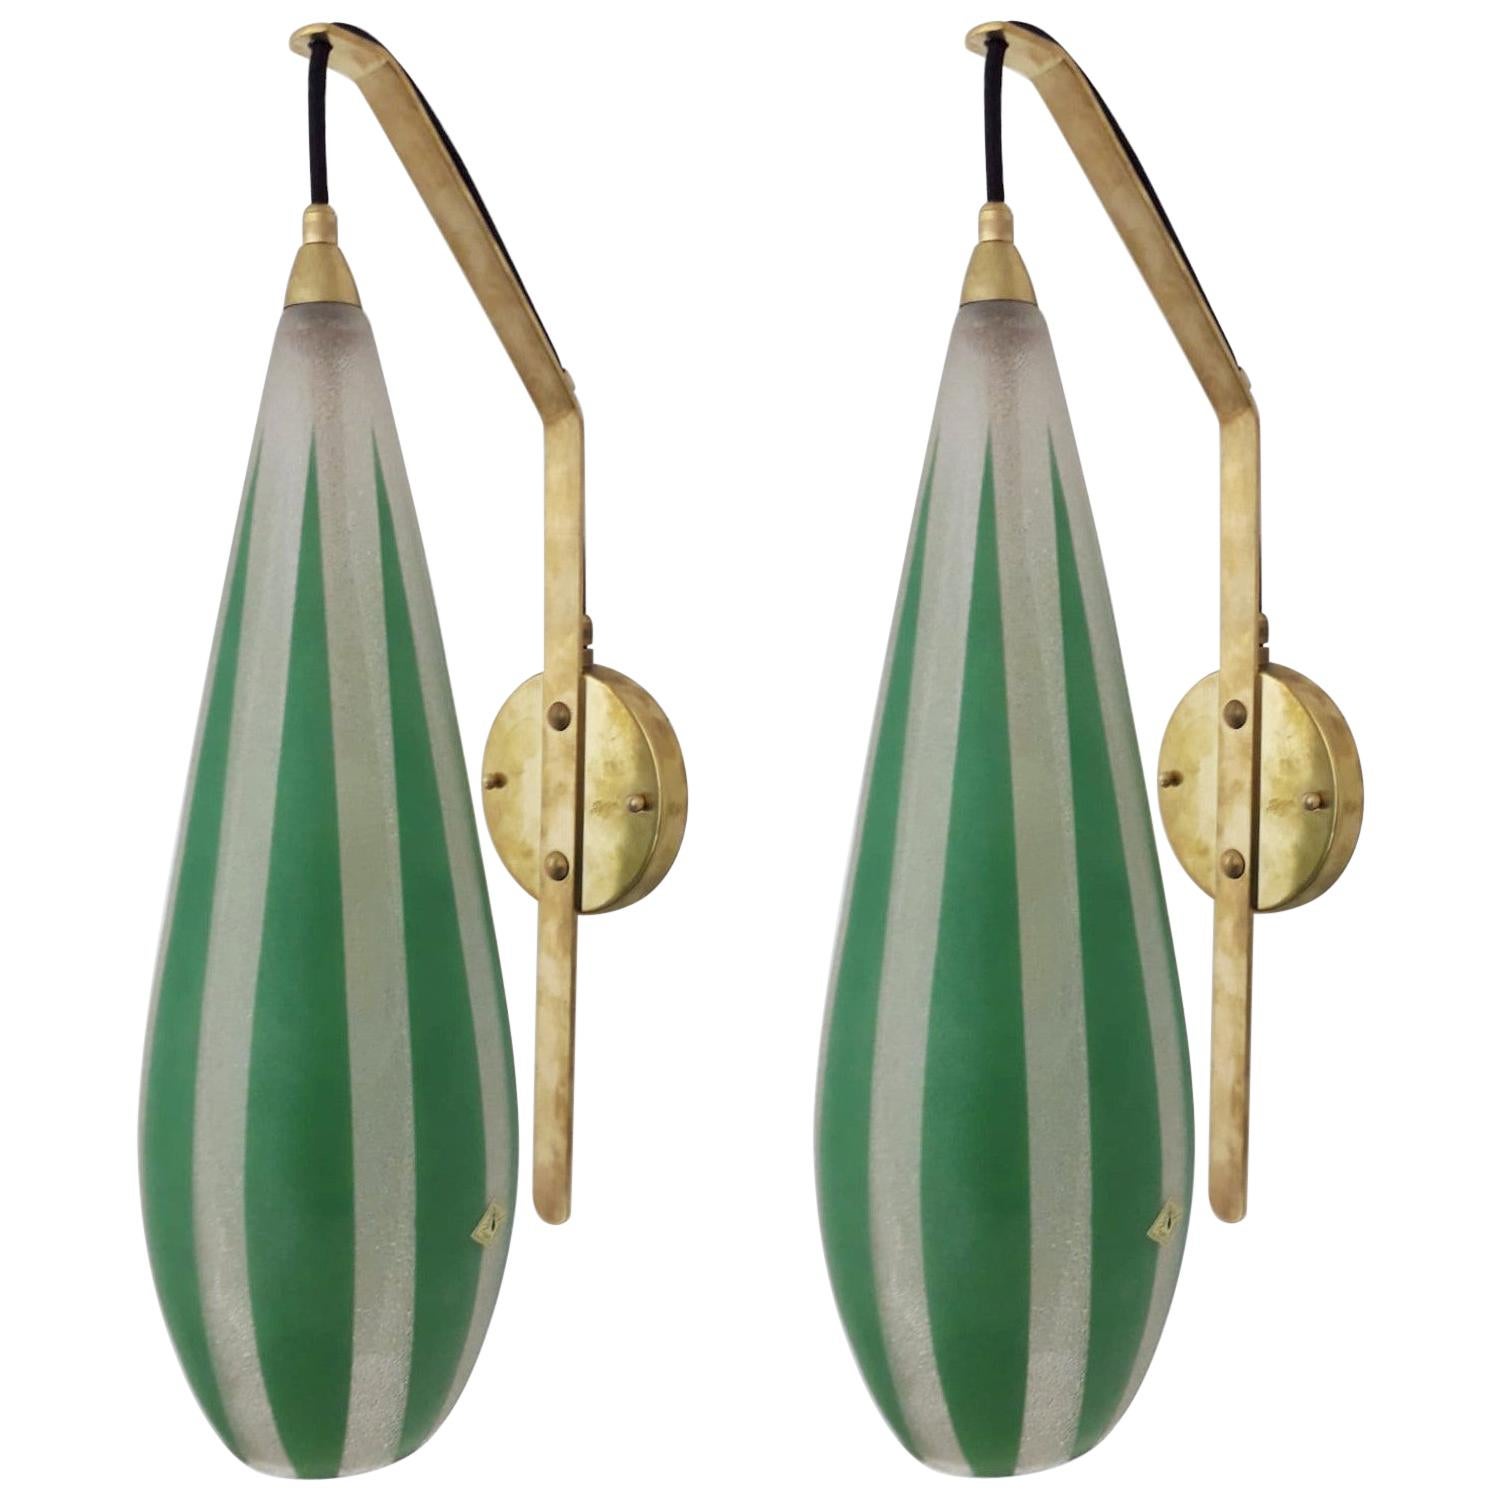 Pair of Green Stripes Sconces